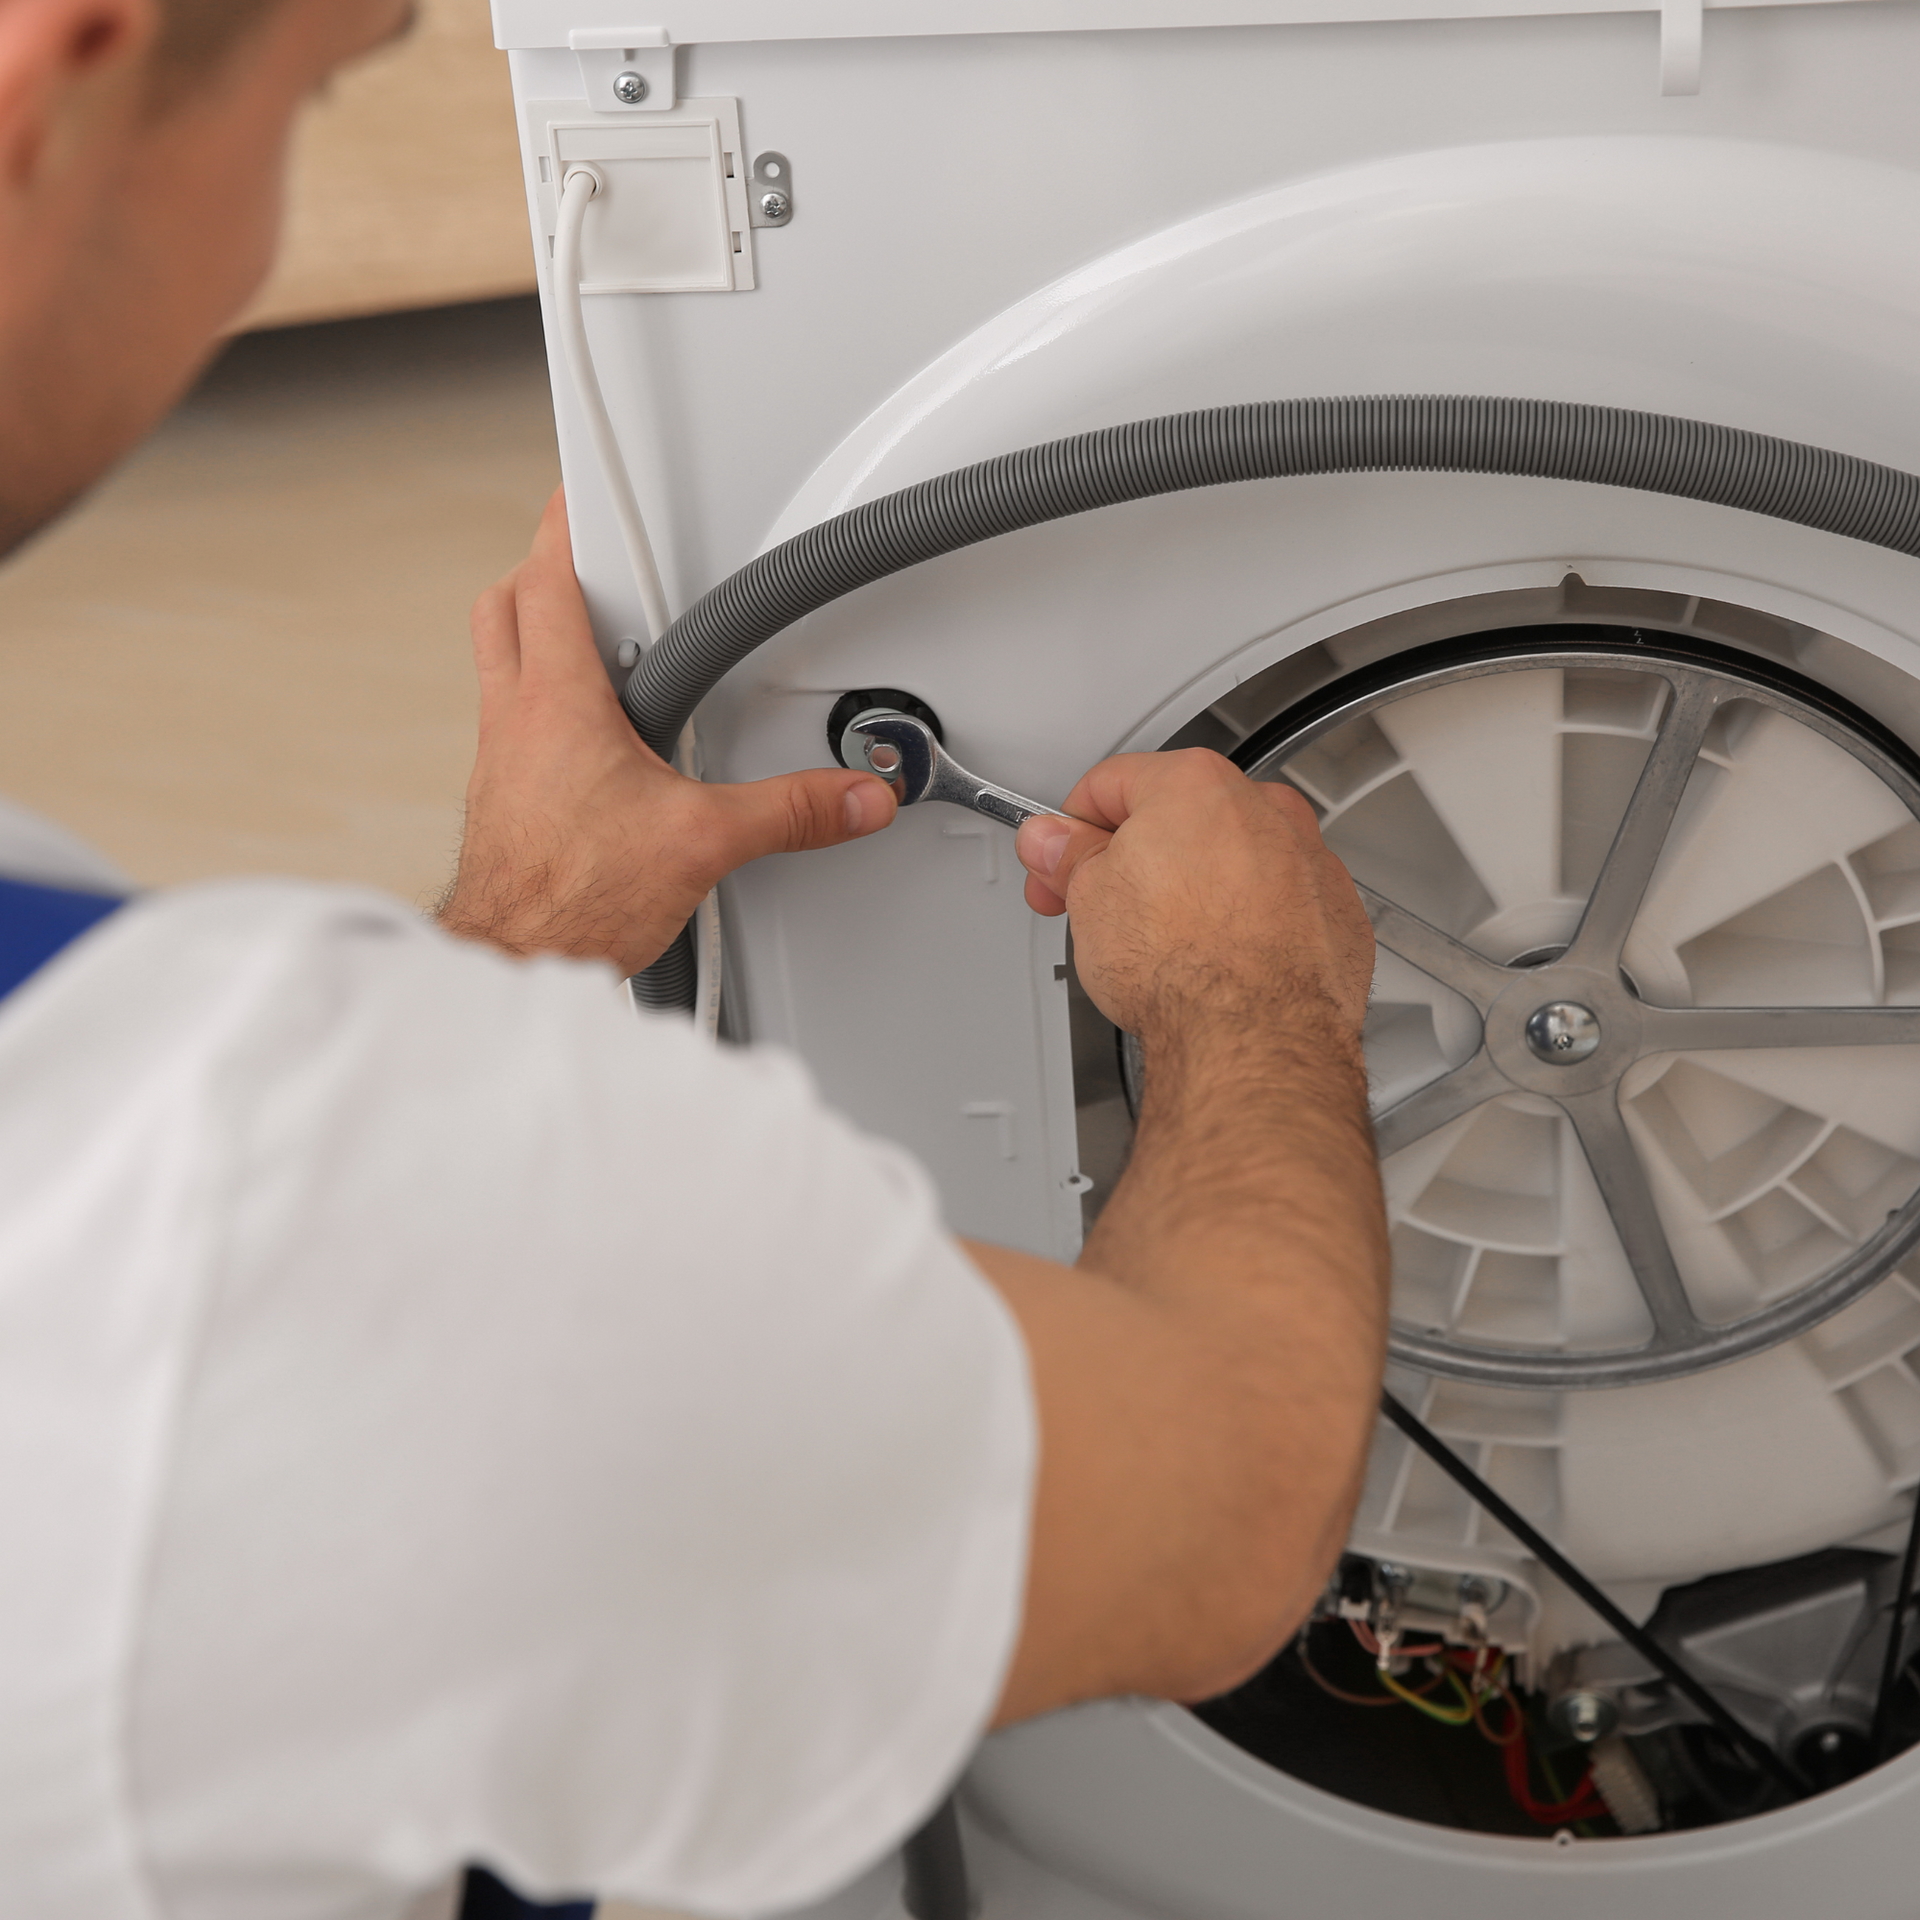 A man is fixing a washing machine with a wrench.